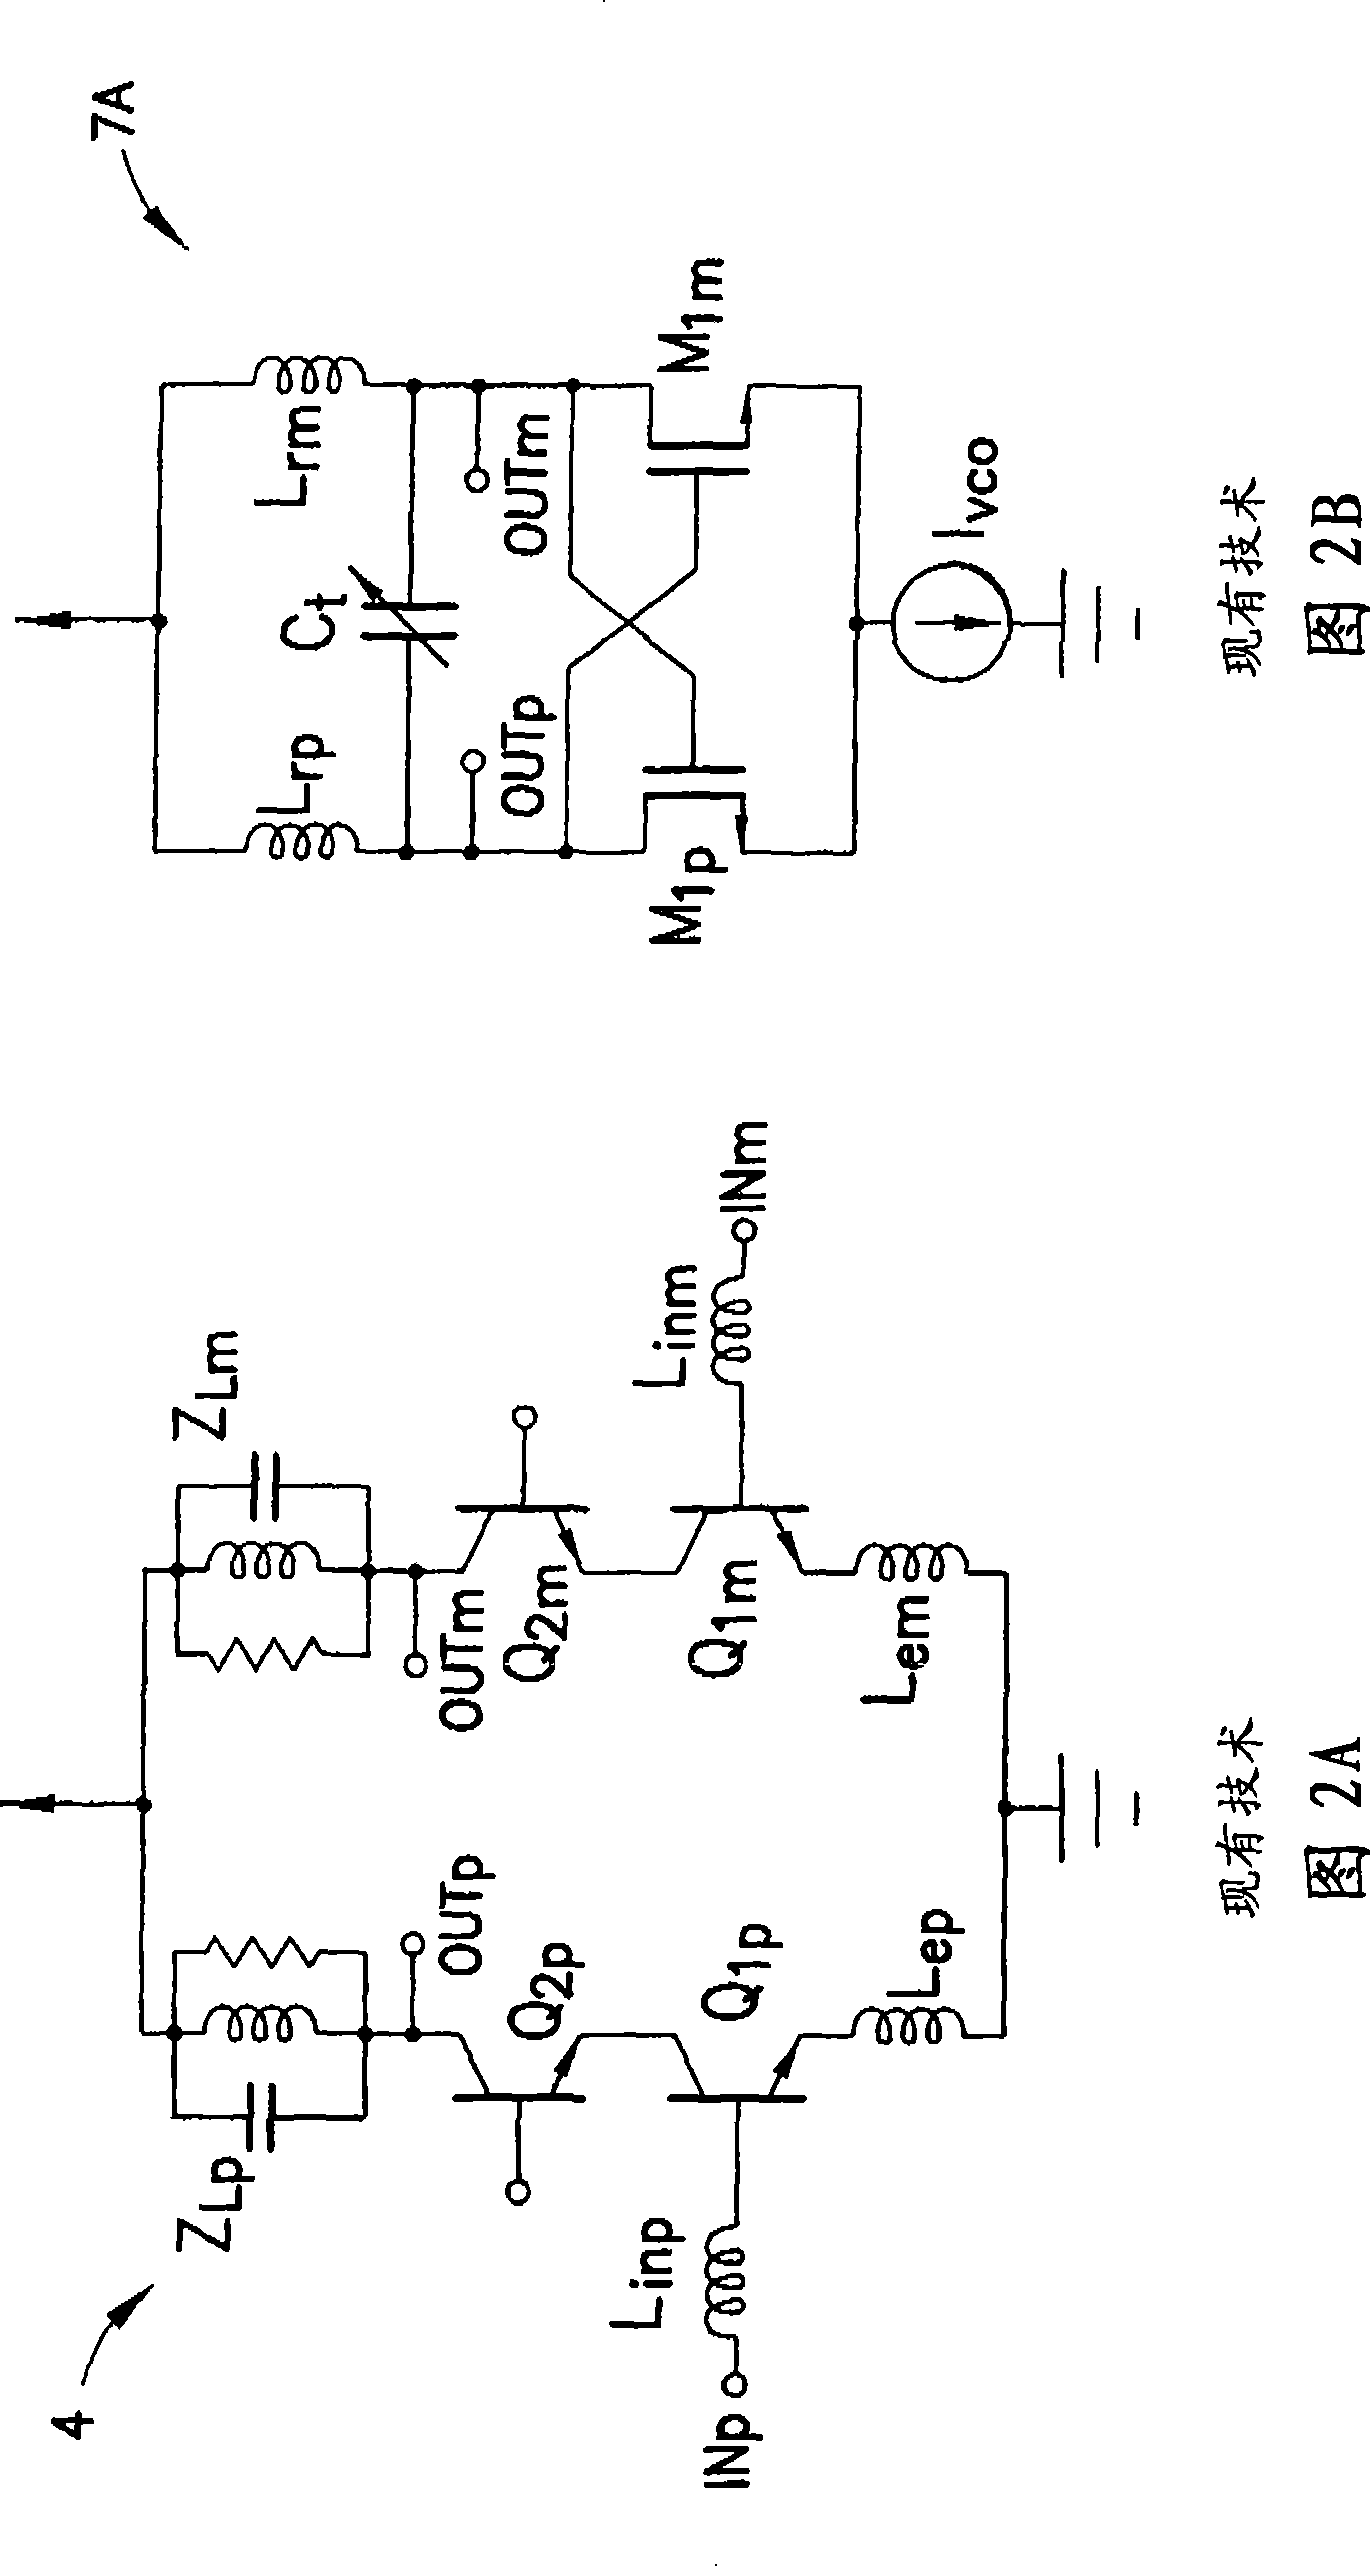 Method and apparatus providing calibration technique for RF performance tuning